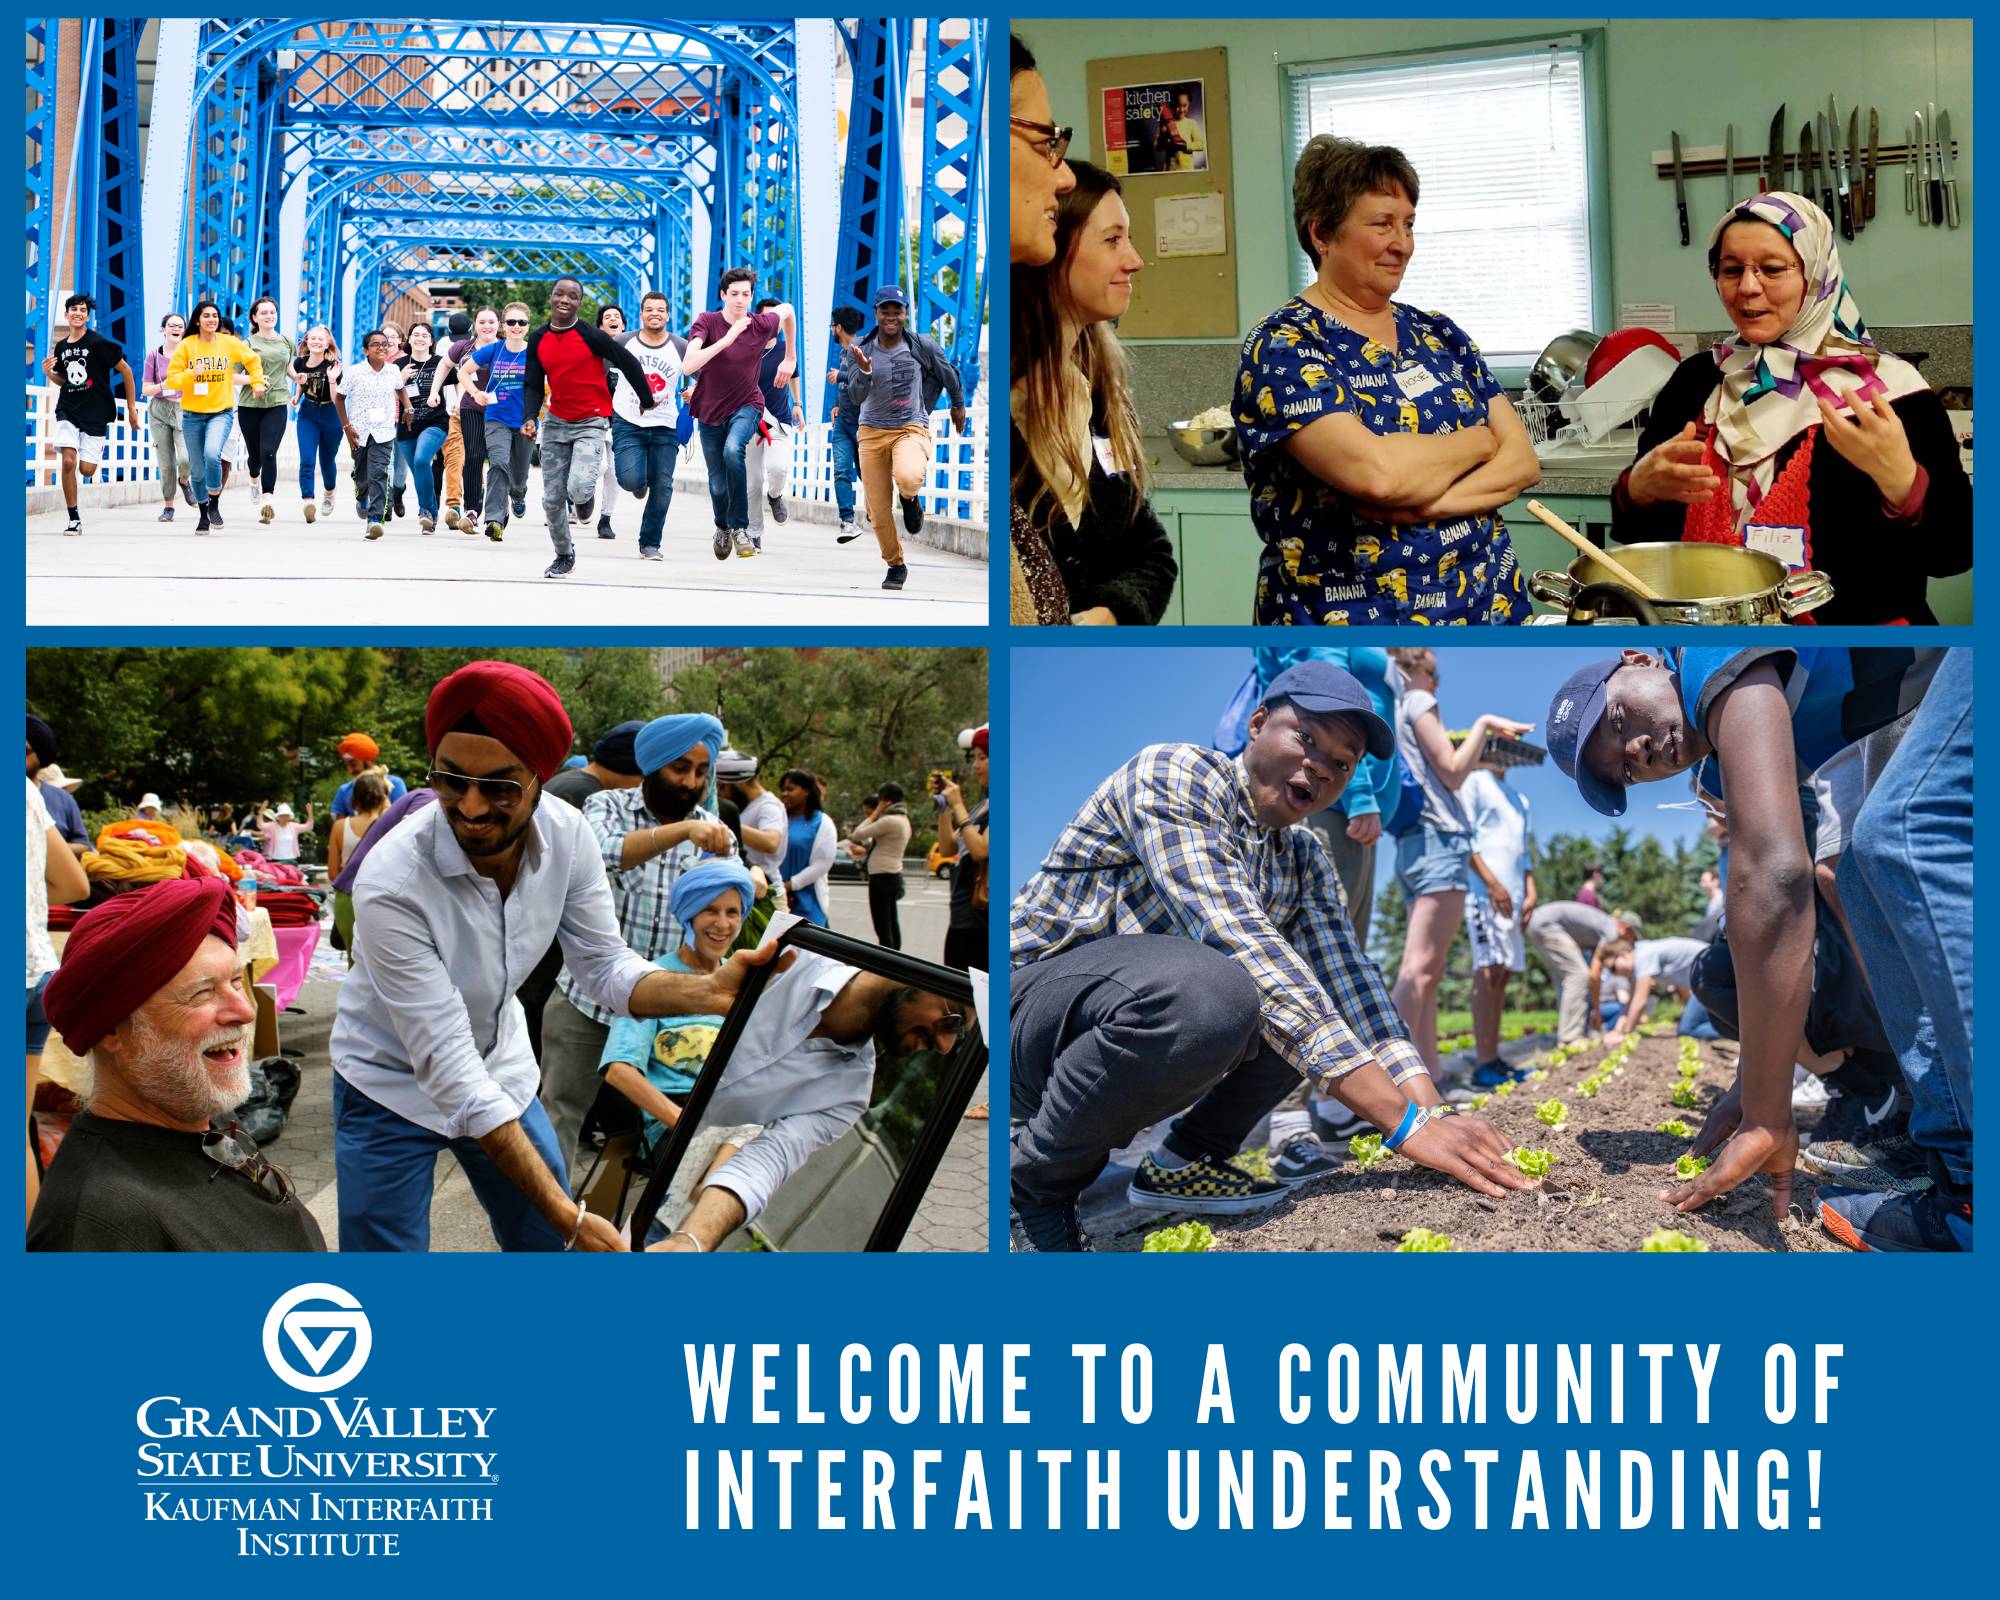 Welcome to a Community of Interfaith Understanding!